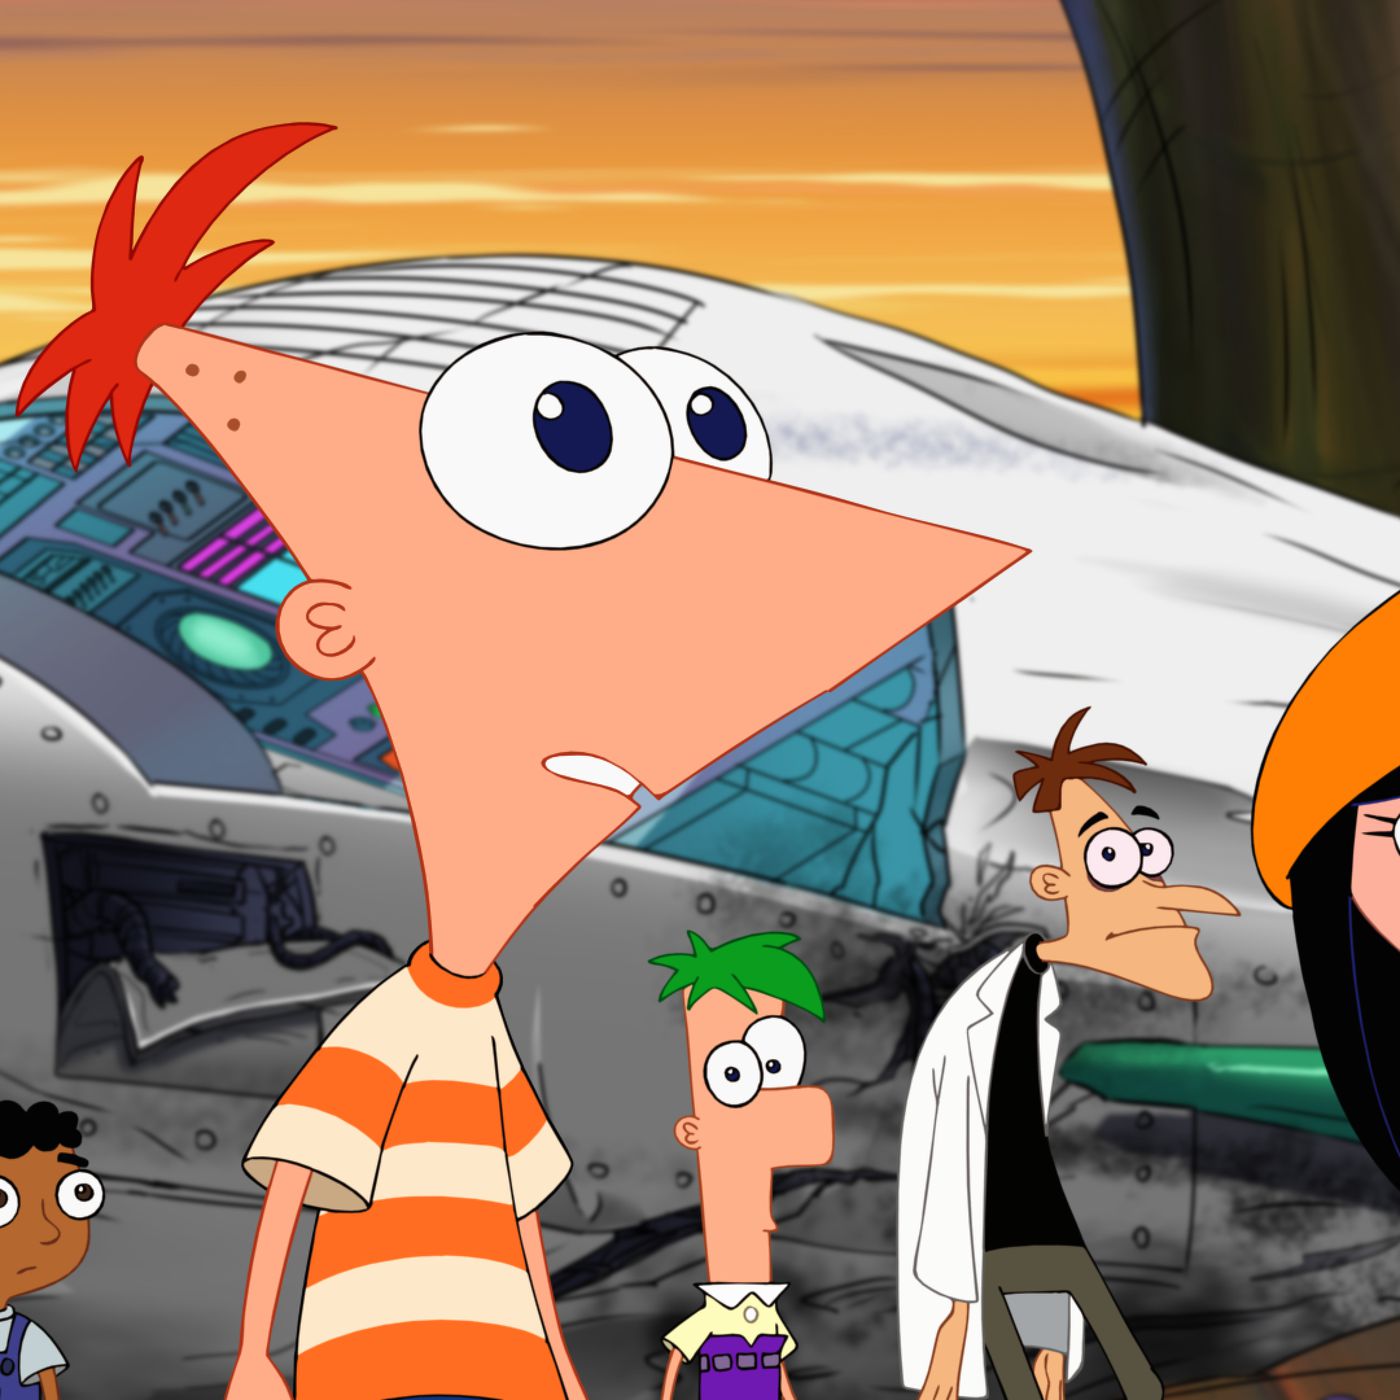 bria love recommends Pictures Of Ferb From Phineas And Ferb